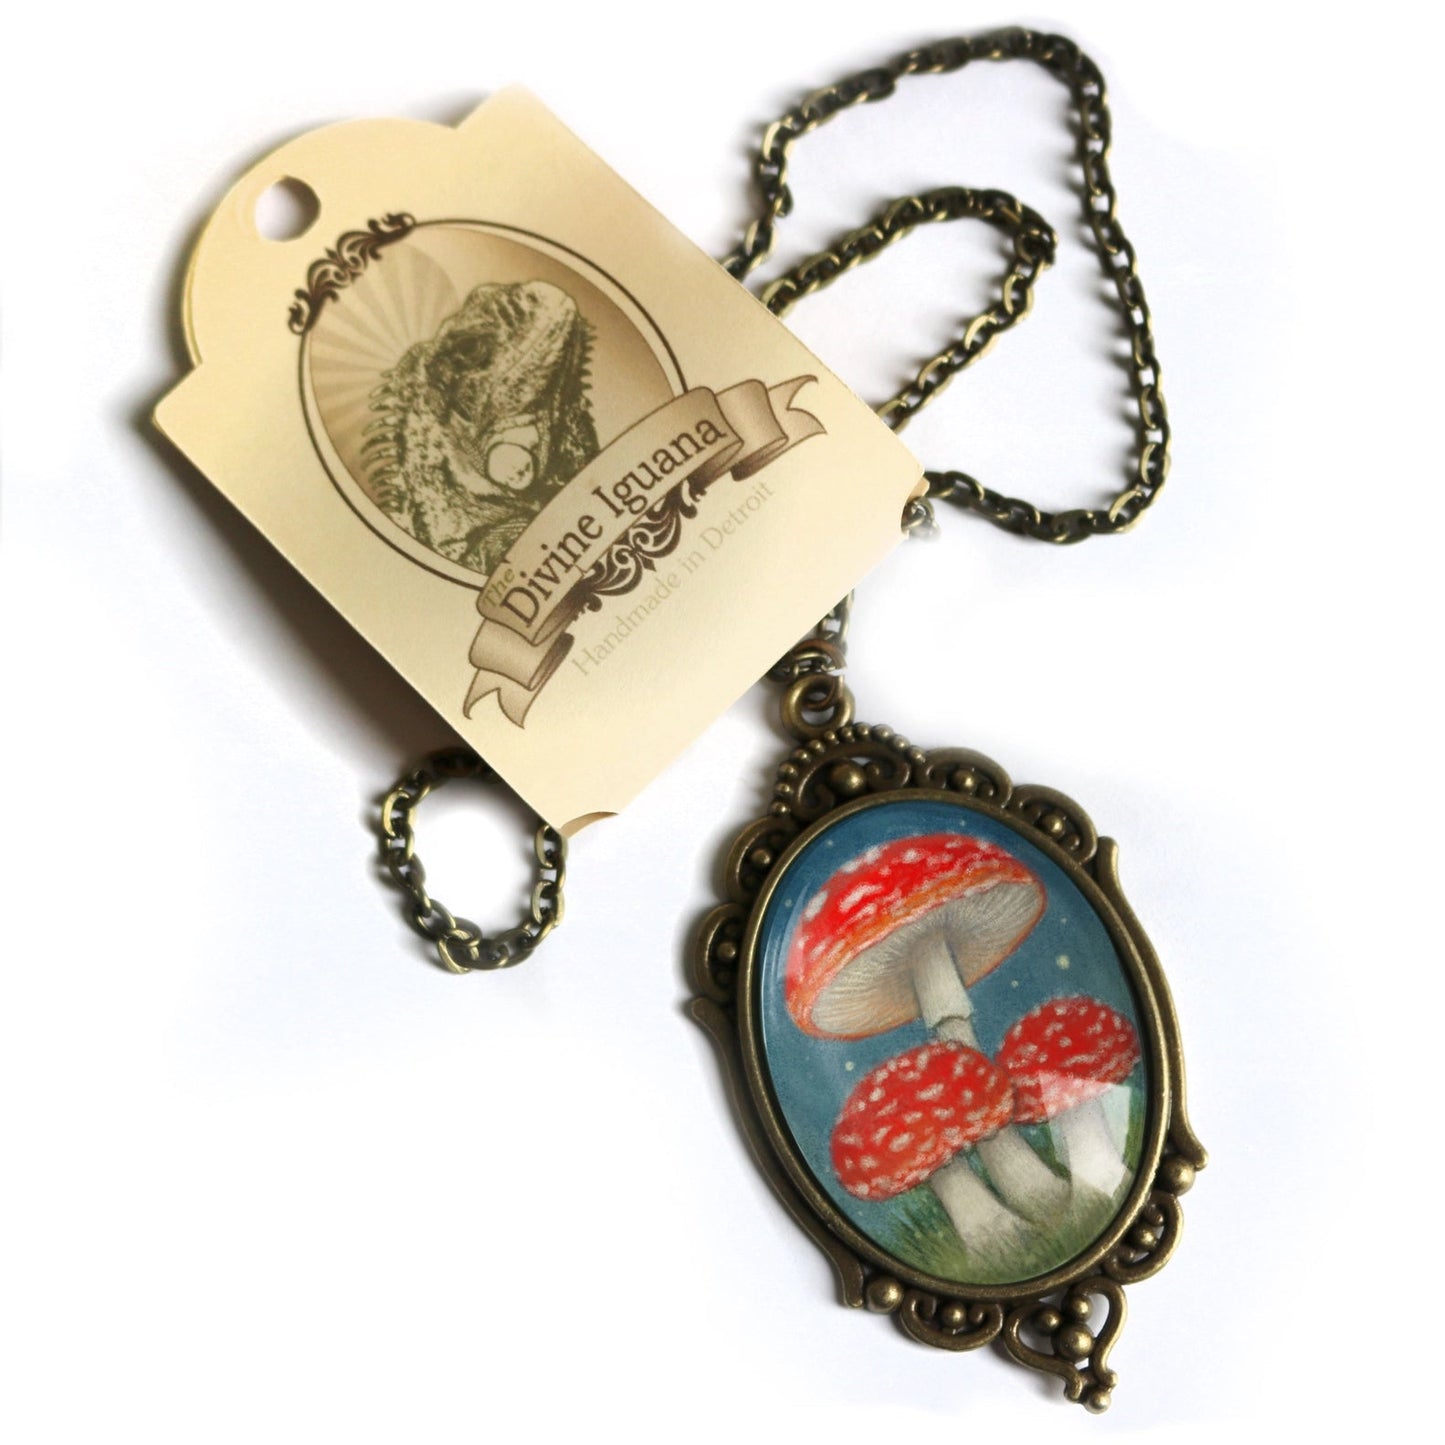 Moonlit Mushrooms Ornate Oval Cottage Core Pendant Necklace | Handmade in the US